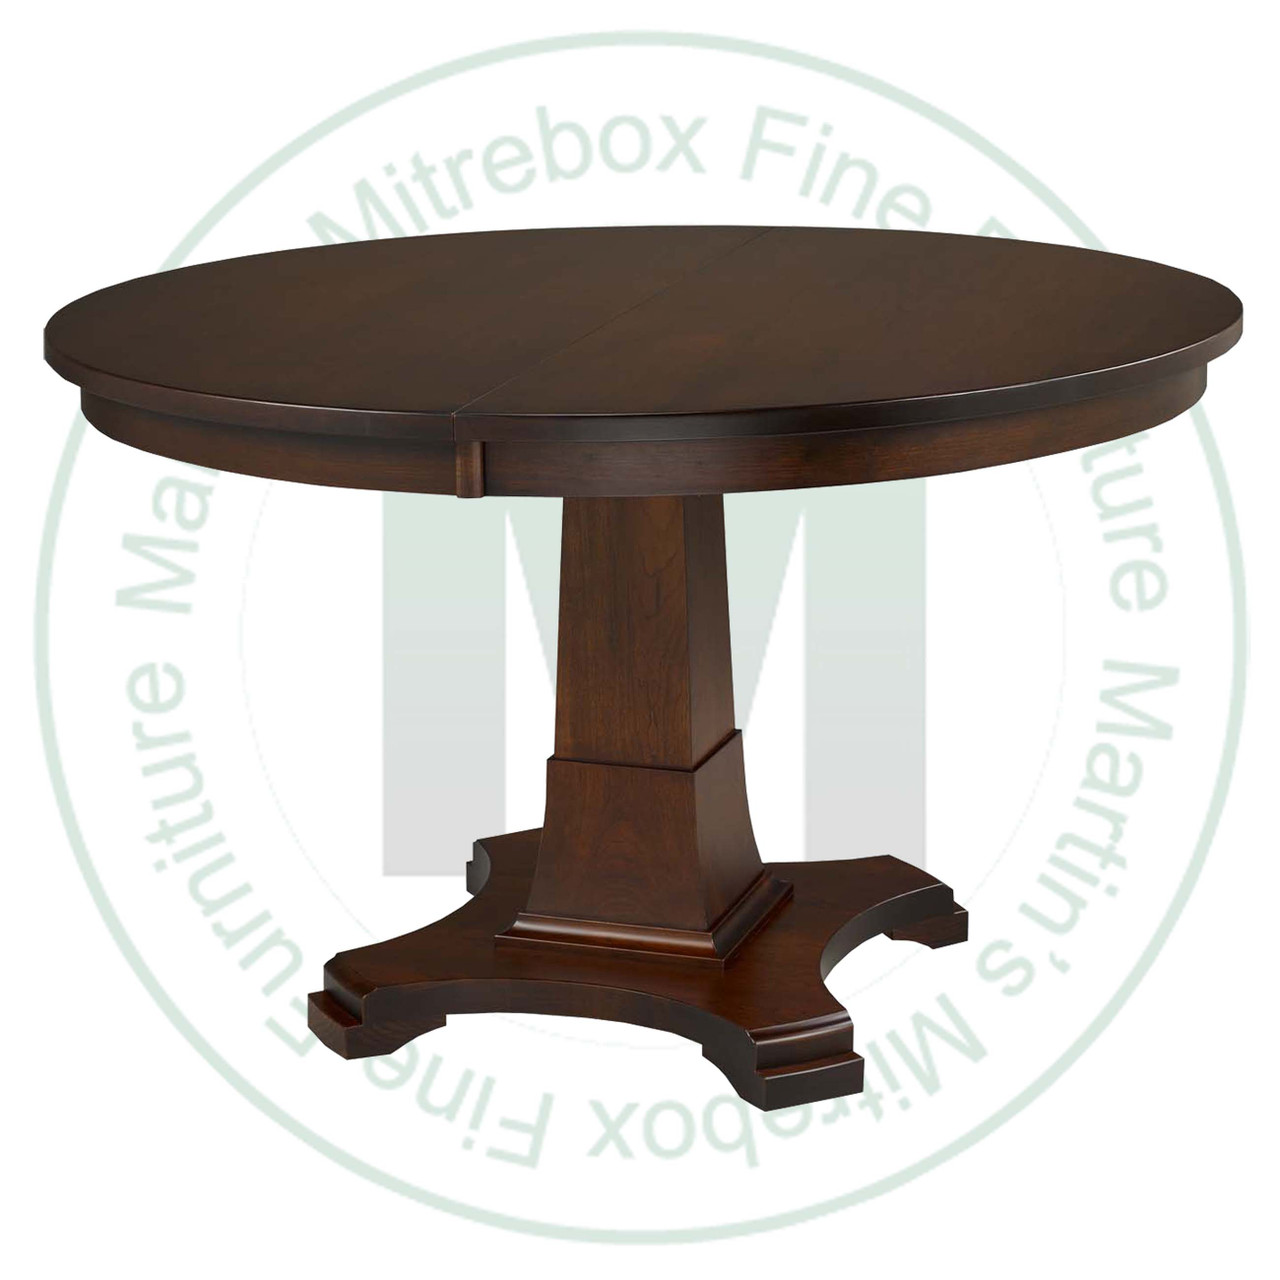 Wormy Maple Abbey Single Pedestal Table 36''D x 42''W x 30''H  Round Solid Table. Table Has 1.25'' Thick Top